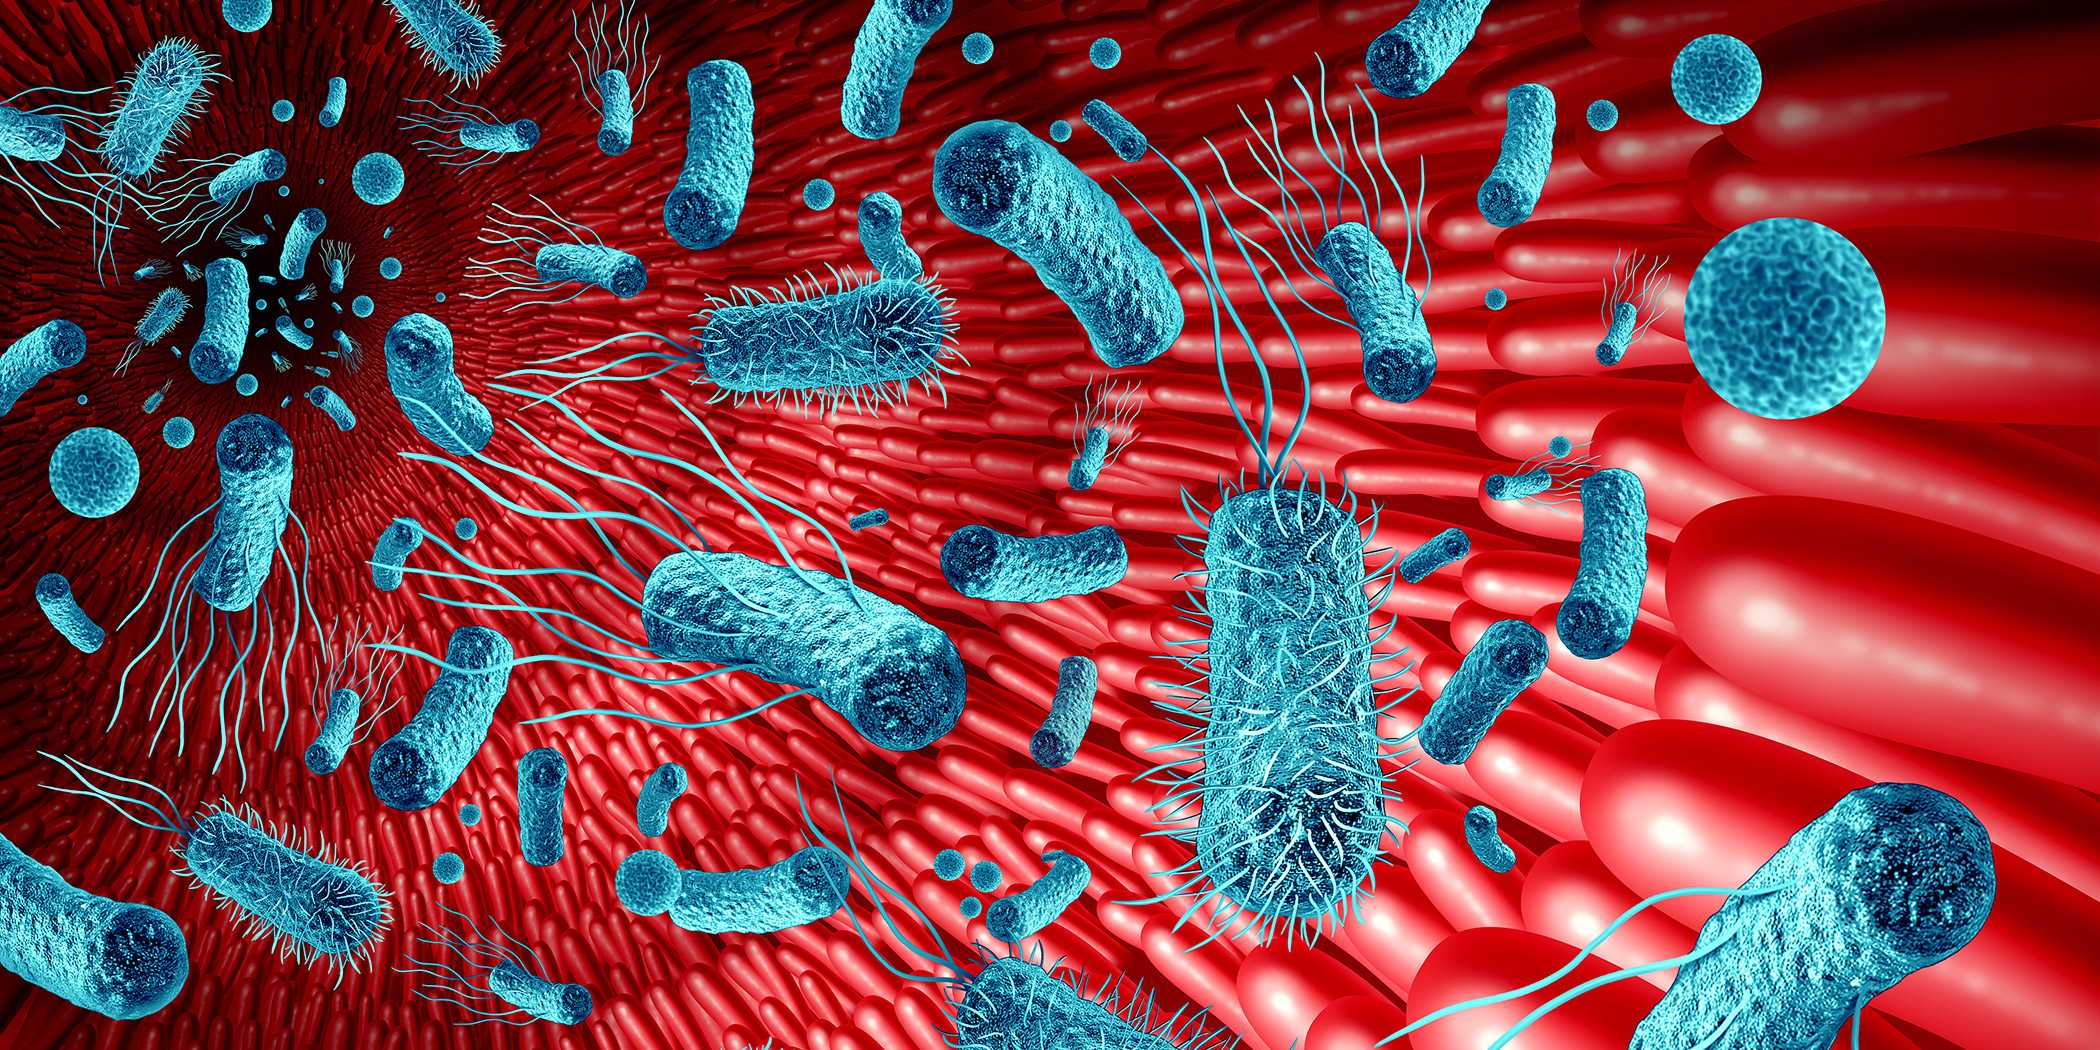 Illustration of the intestine, red intestinal villi with bacteria floating in front of them (light blue).